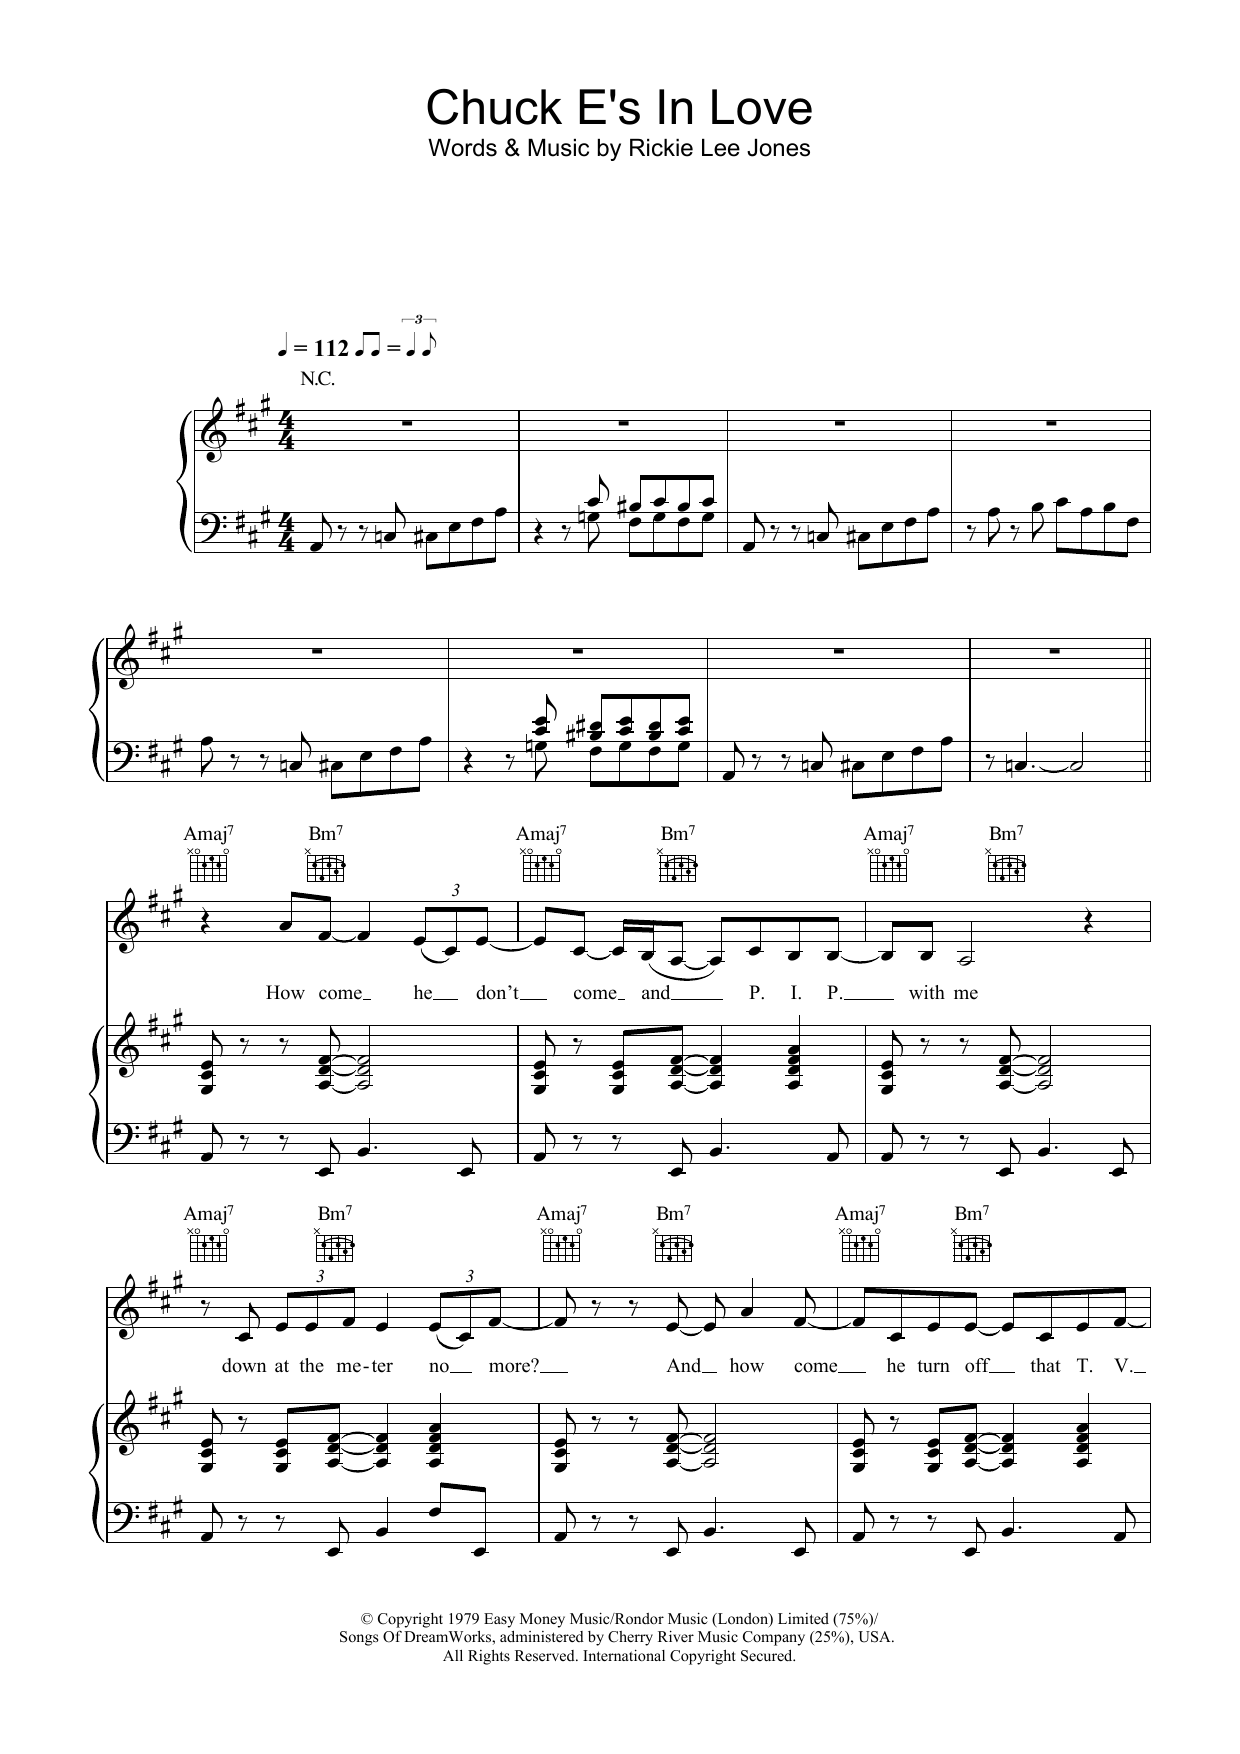 Rickie Lee Jones Chuck E's In Love sheet music notes and chords. Download Printable PDF.